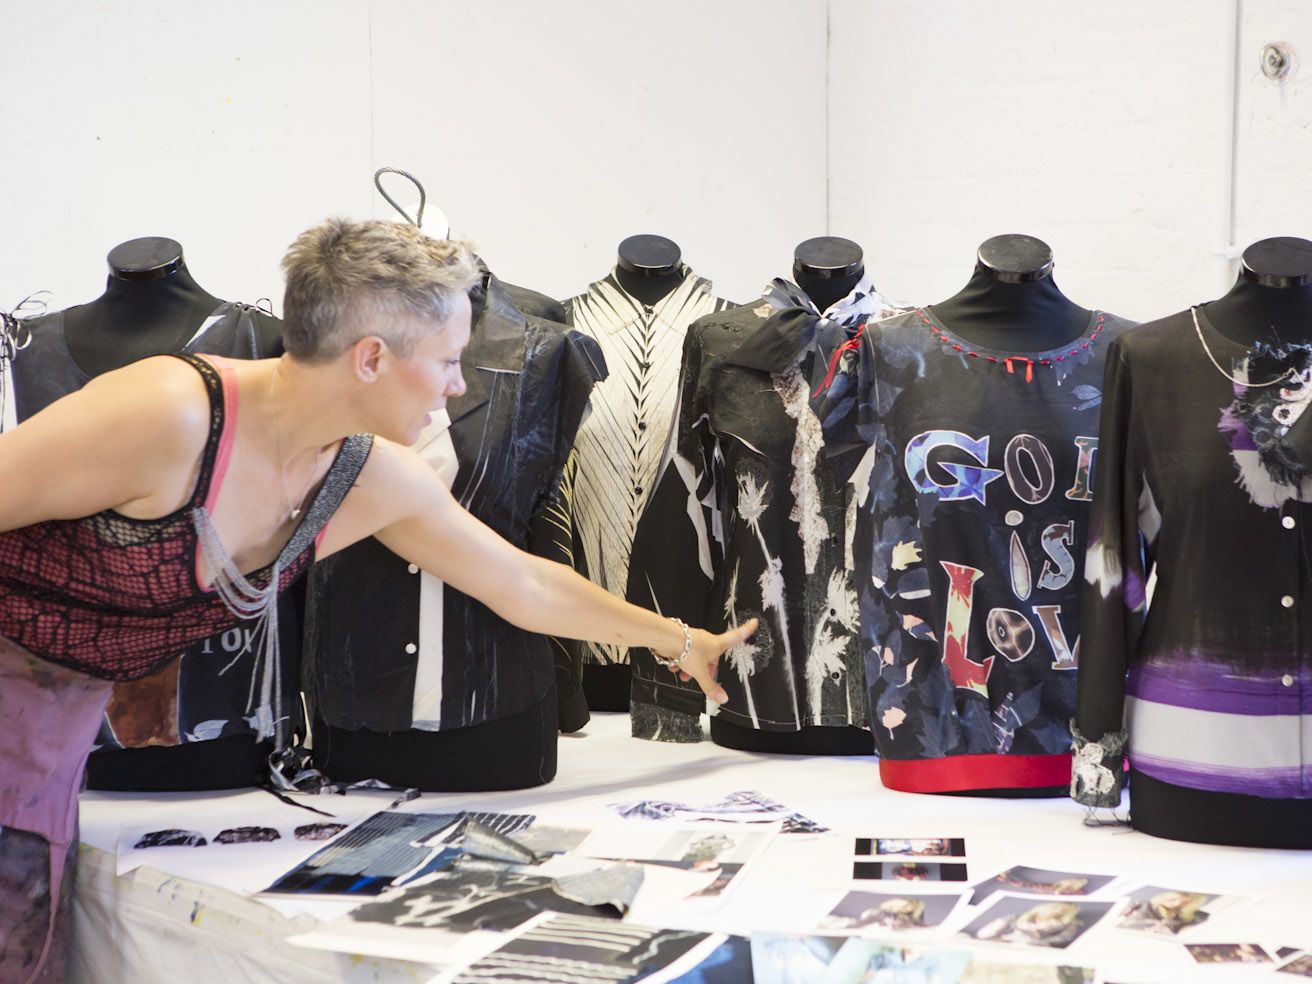 Rebecca Earley in a workshop working with shirts on mannequins and images laid out on a table